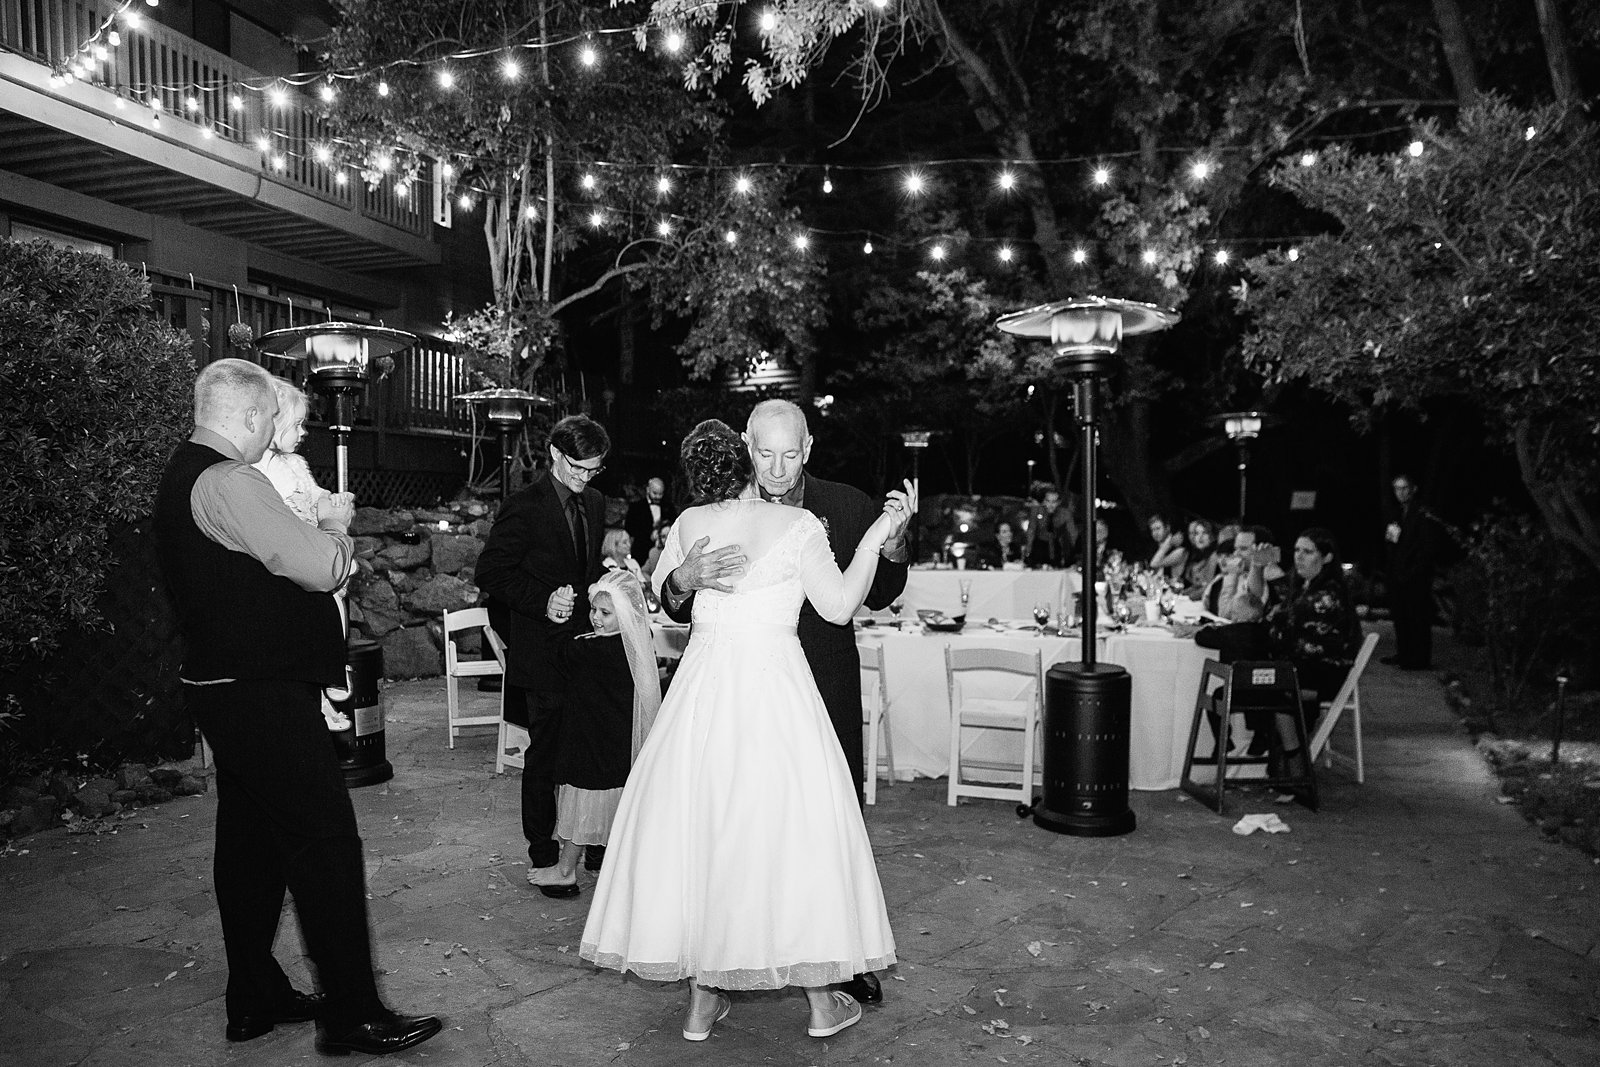 Bride dancing with guests at L'Auberge de Sedona wedding reception by Sedona wedding photographer PMA Photography